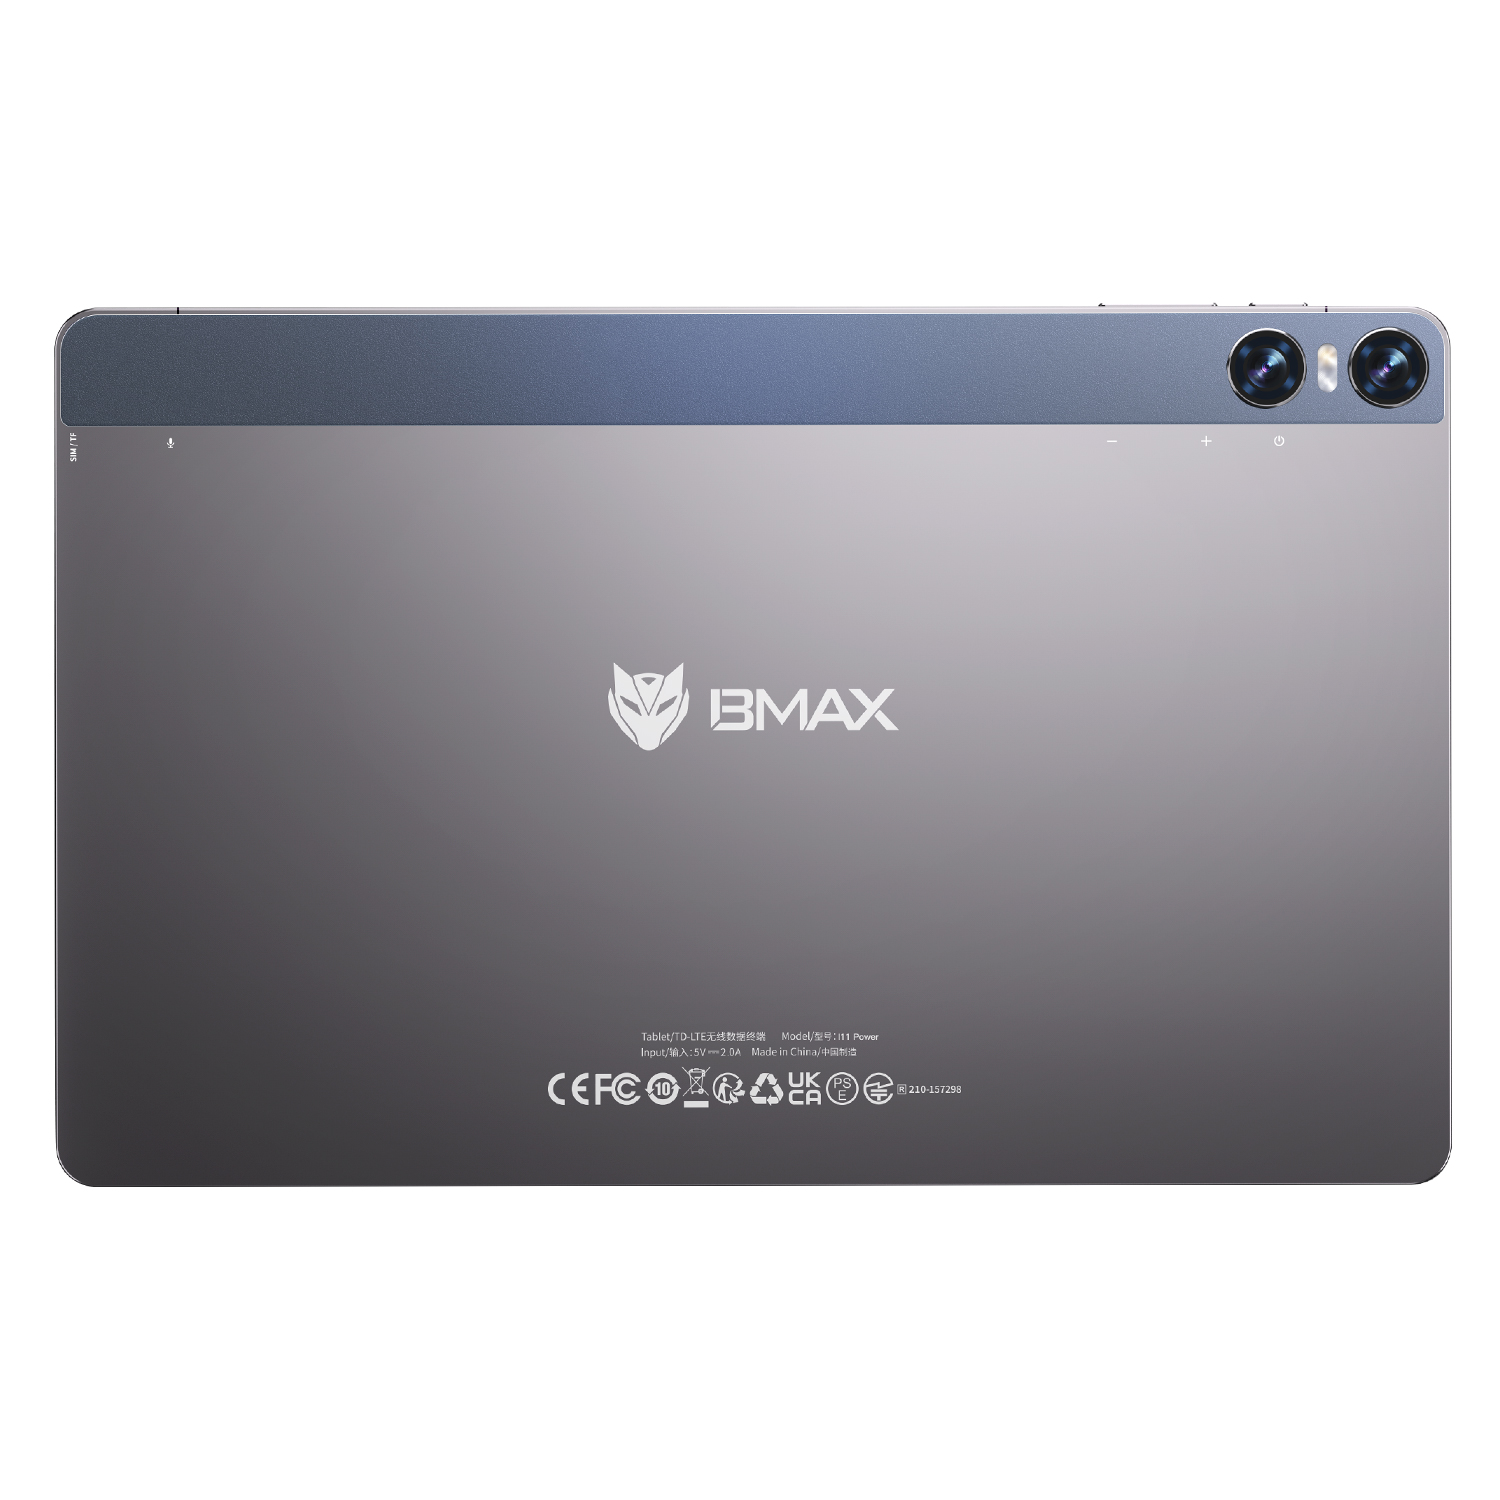 The hot-selling tablet BMAX I11 Power, with its new configuration and ultimate experience, once again leads the new boom in the tablet market!